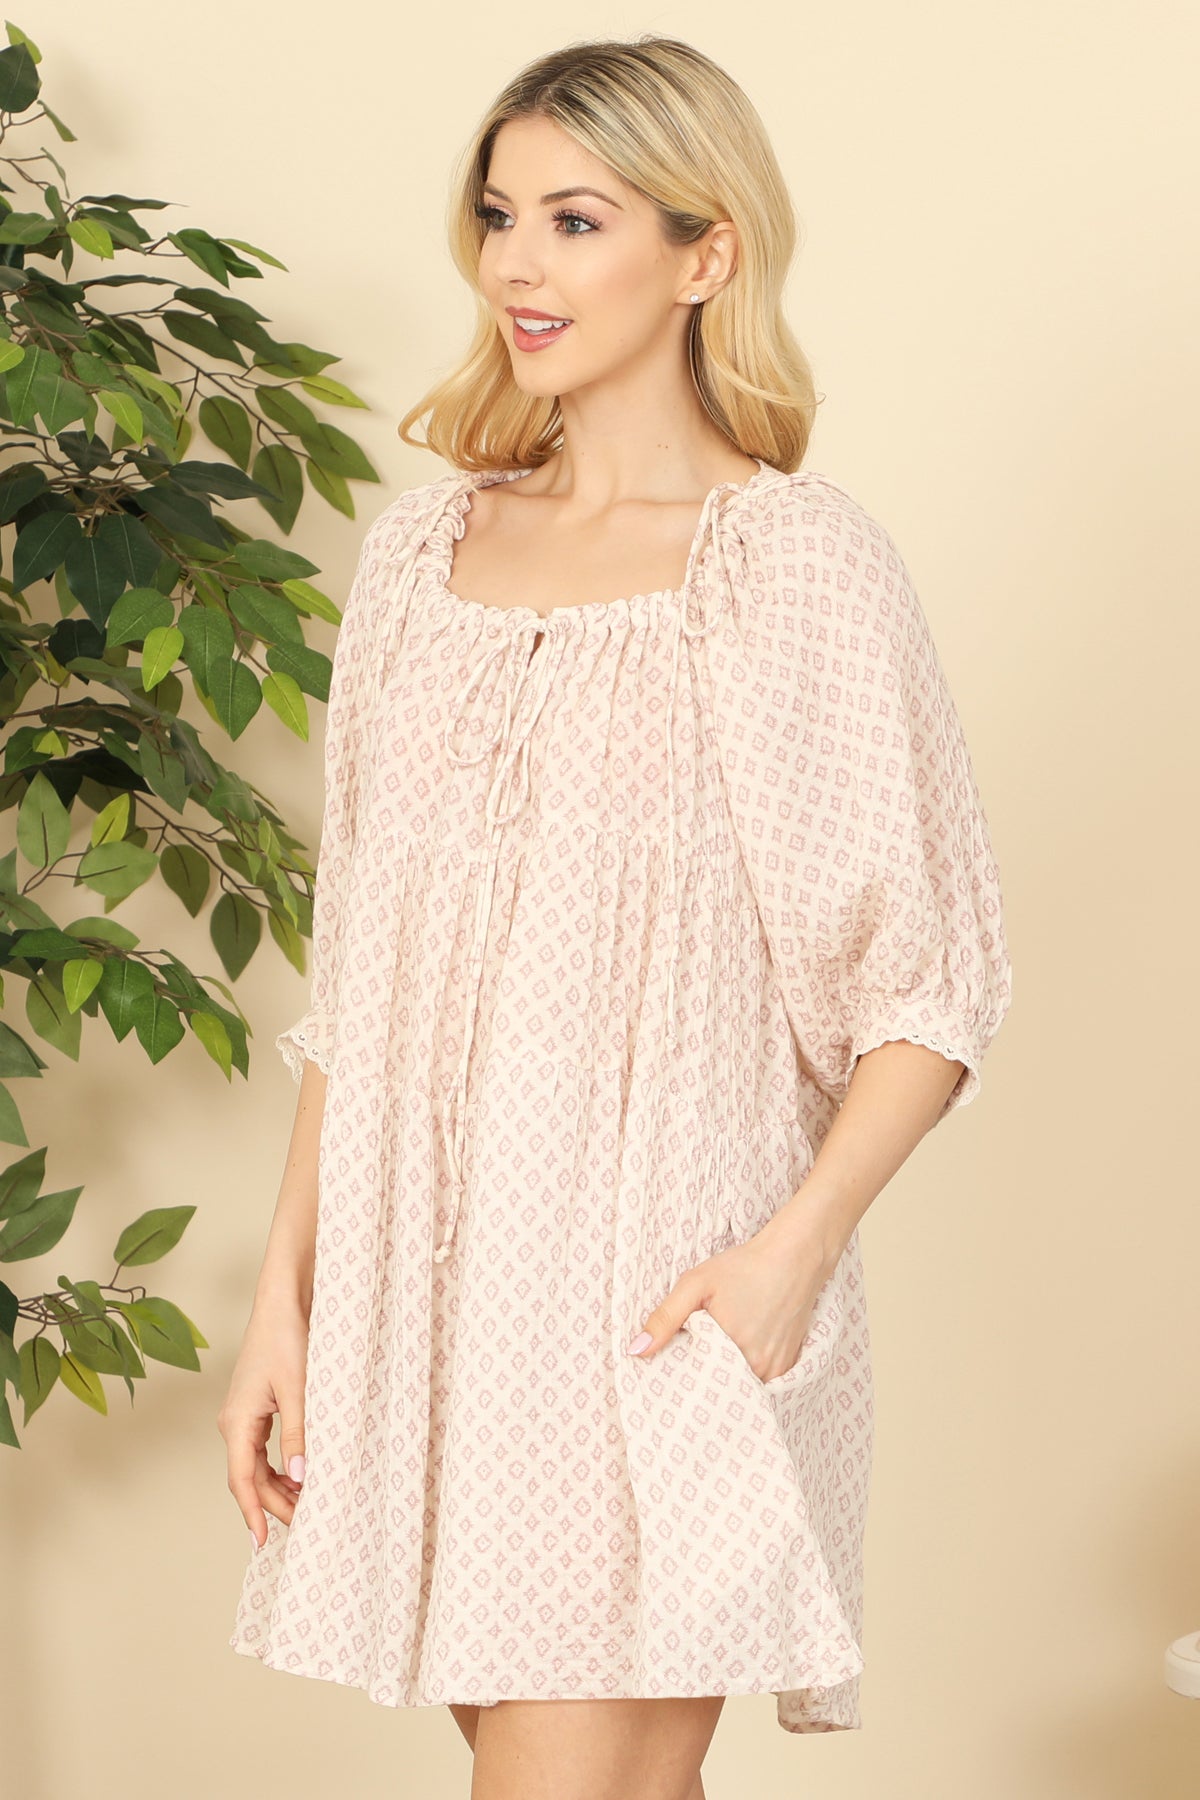 MAUVE CREAM PRINTED HALF PUFF SLEEVE BABYDOLL DRESS 2-2-1 (NOW $5.75 ONLY!)